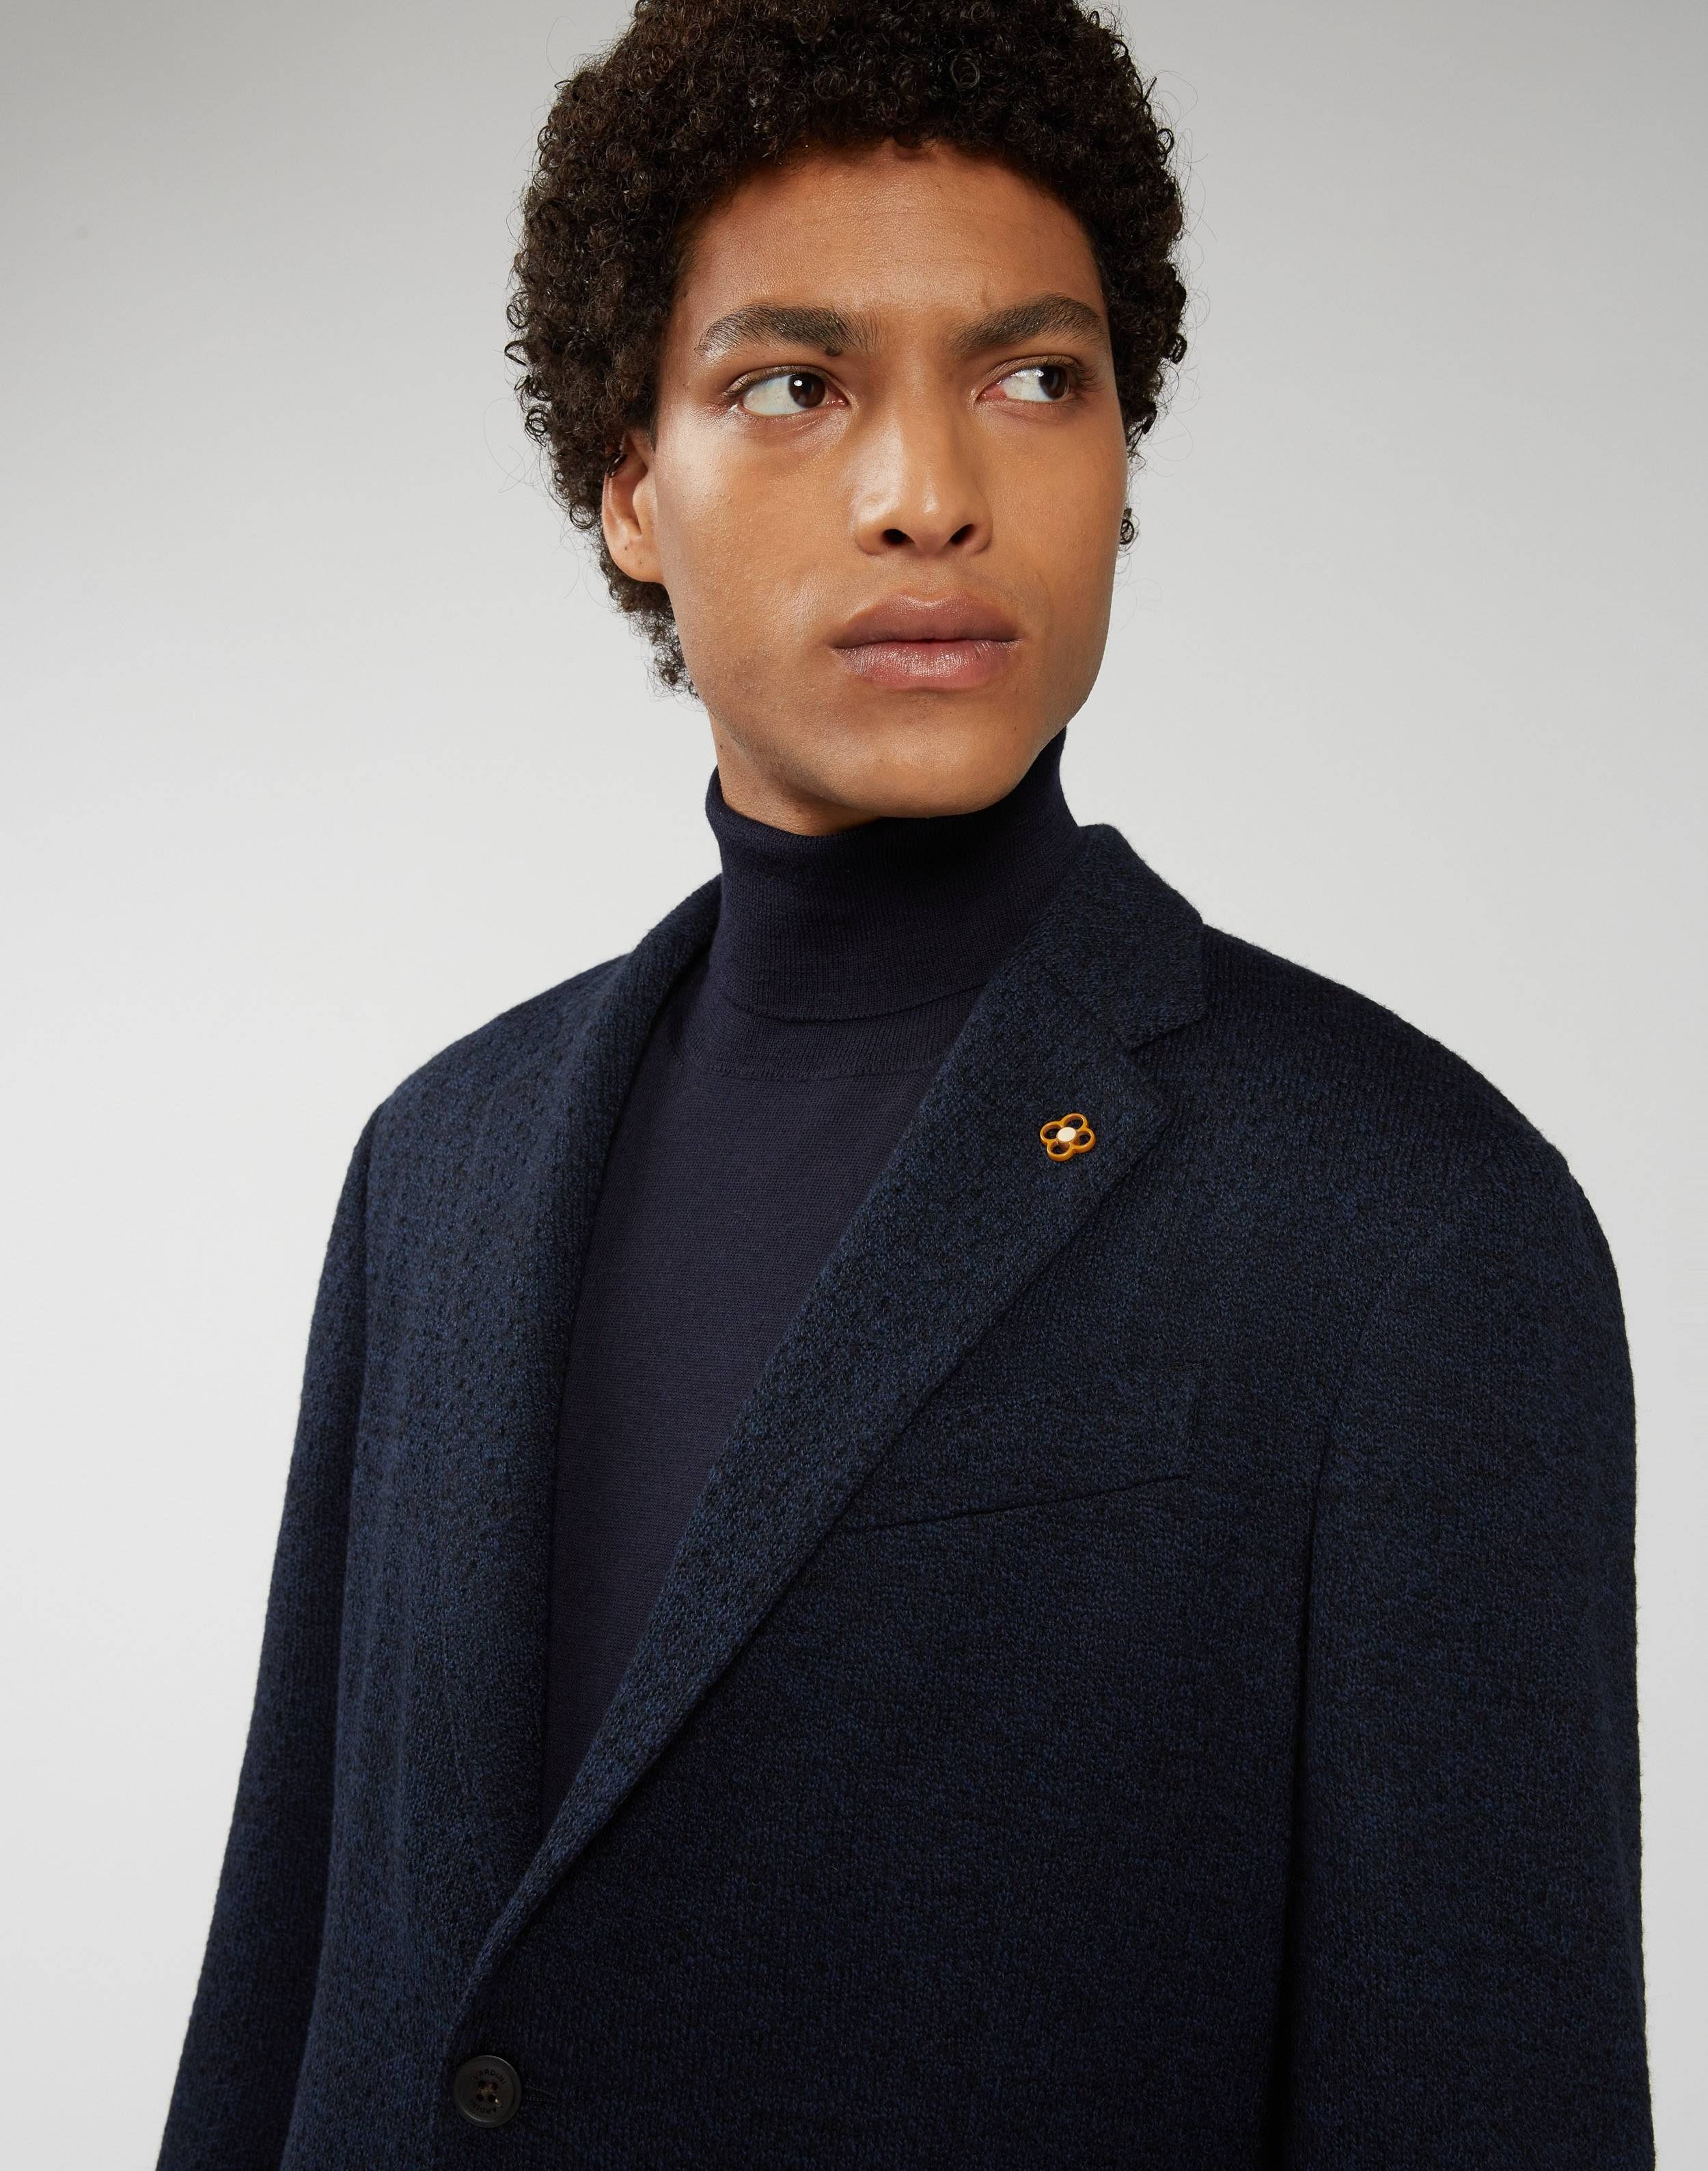 Blue jacket in a lightweight perforated knit - Liknit